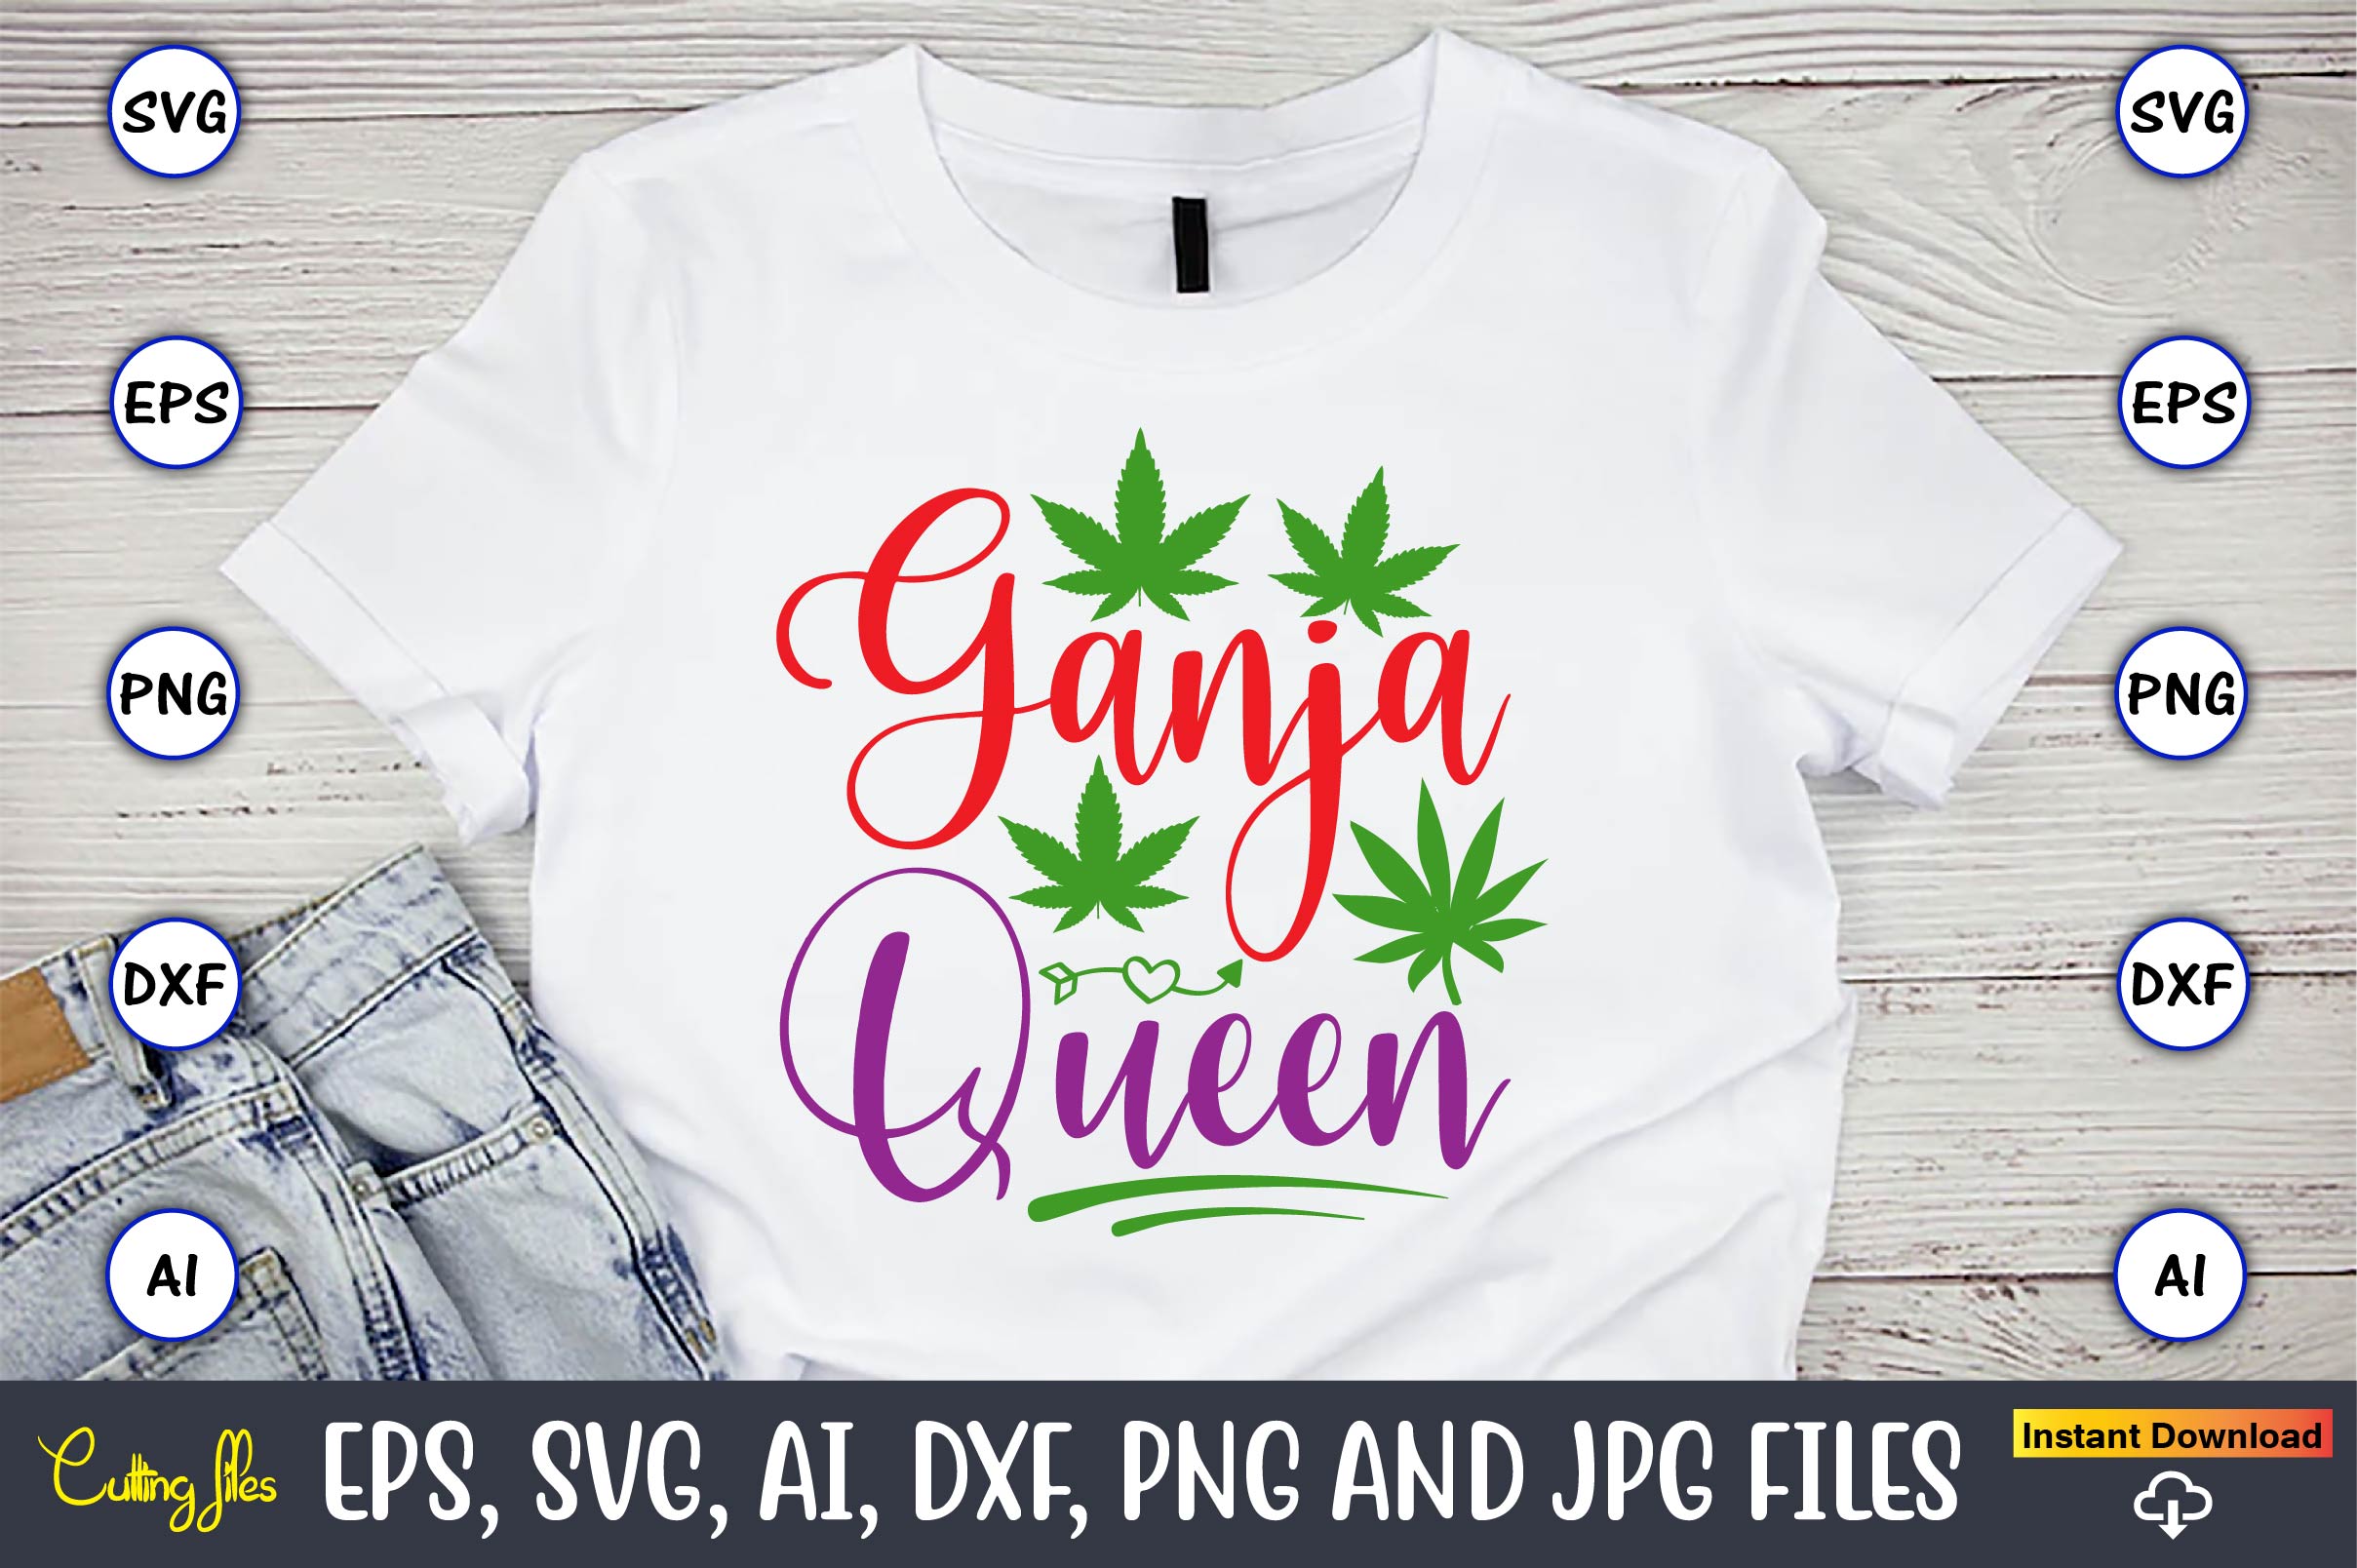 Image of a white t-shirt with an amazing inscription Ganja queen.